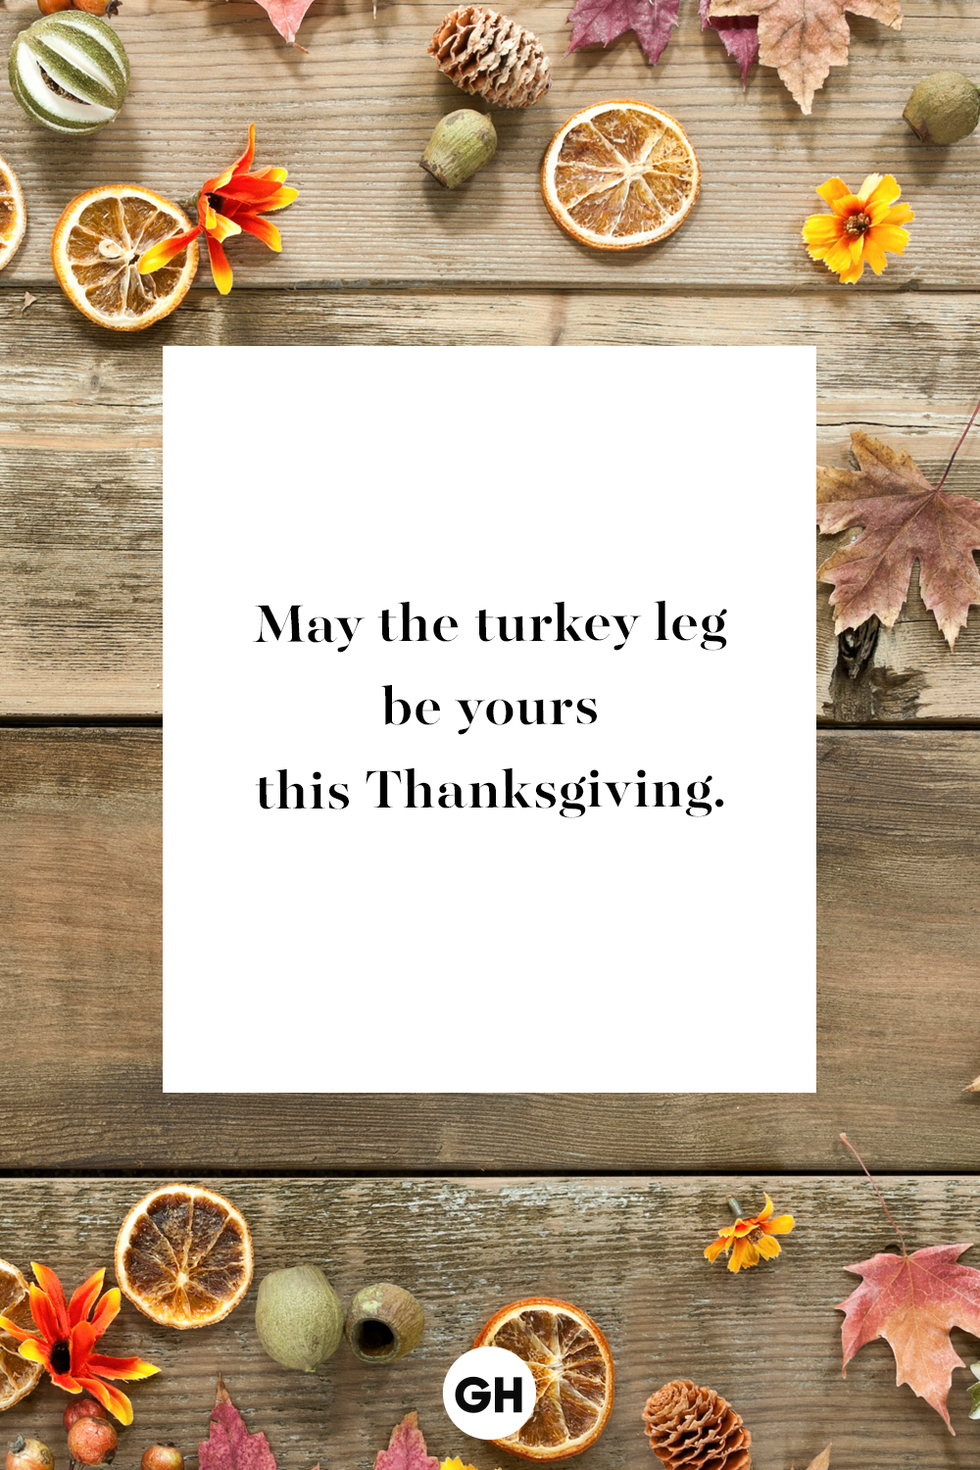 52 Best Thanksgiving Wishes and Messages for Friends & Family 2022